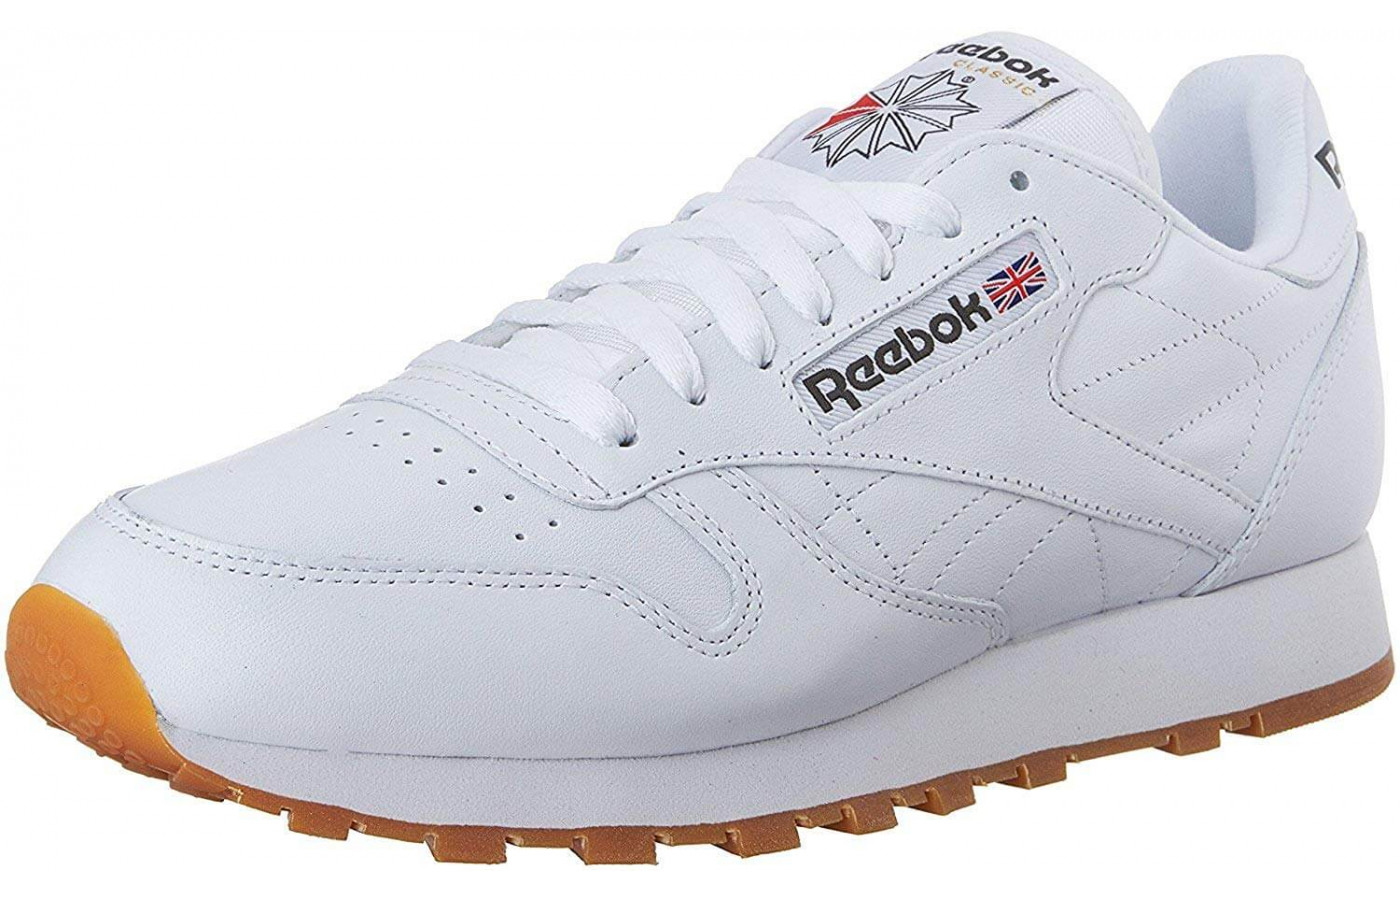 Are Reebok Classic Good for Running?